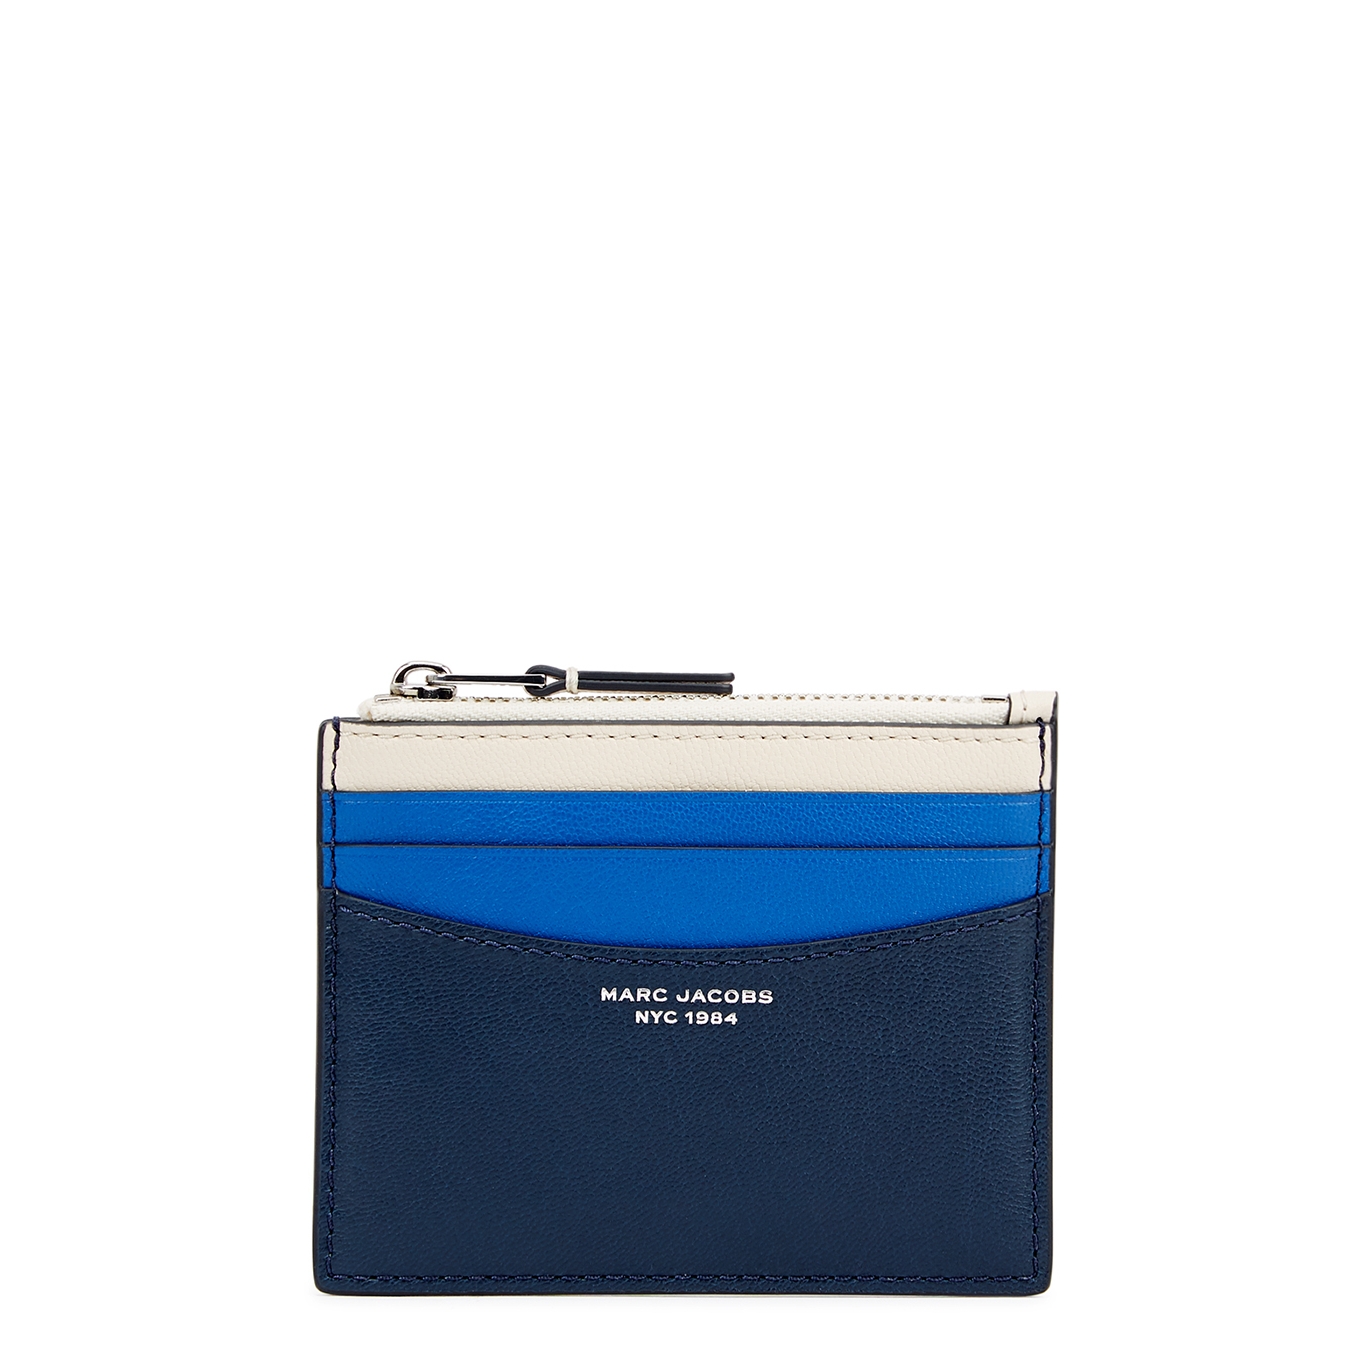 Marc Jacobs Slim 84 Panelled Leather Wallet - Blue - One Size